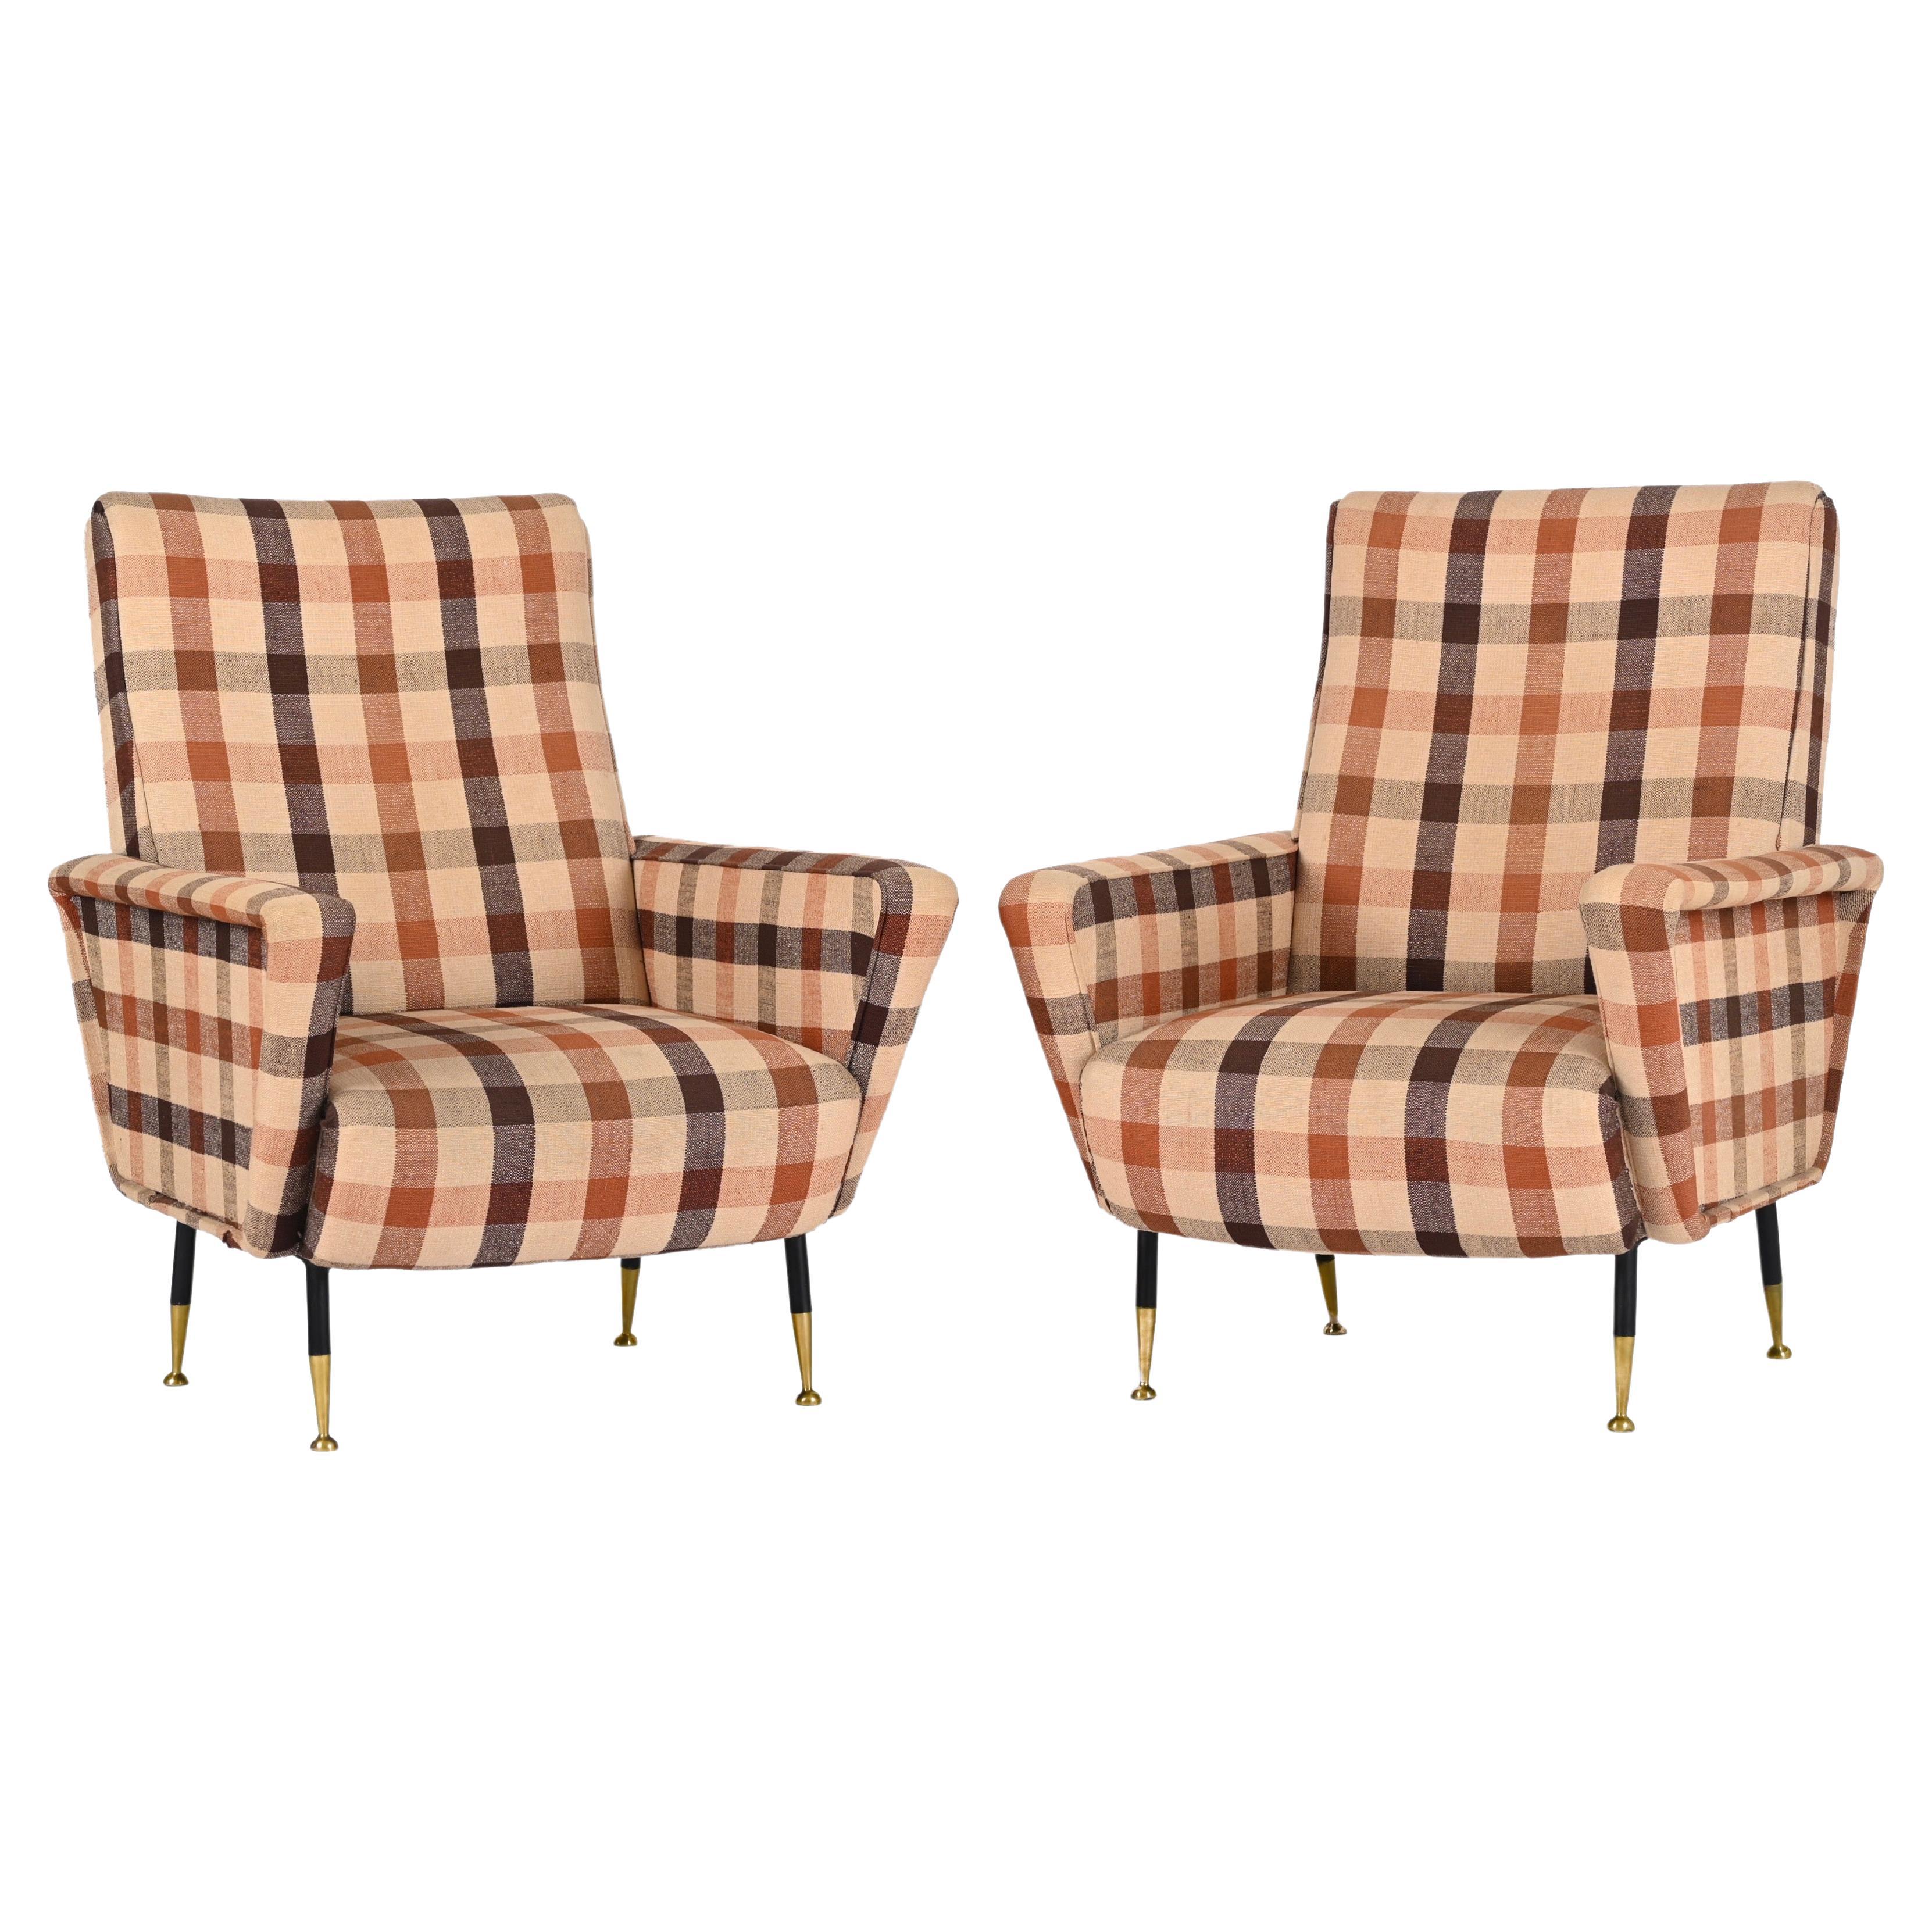 Pair of Fantastic Mid-Century Modern check fabric armchairs with brass feet. This incredible set was produced in Italy in the style of Zanuso in the 1950s.

The beauty of these armchairs is due to the Italian manufacturing, with each part